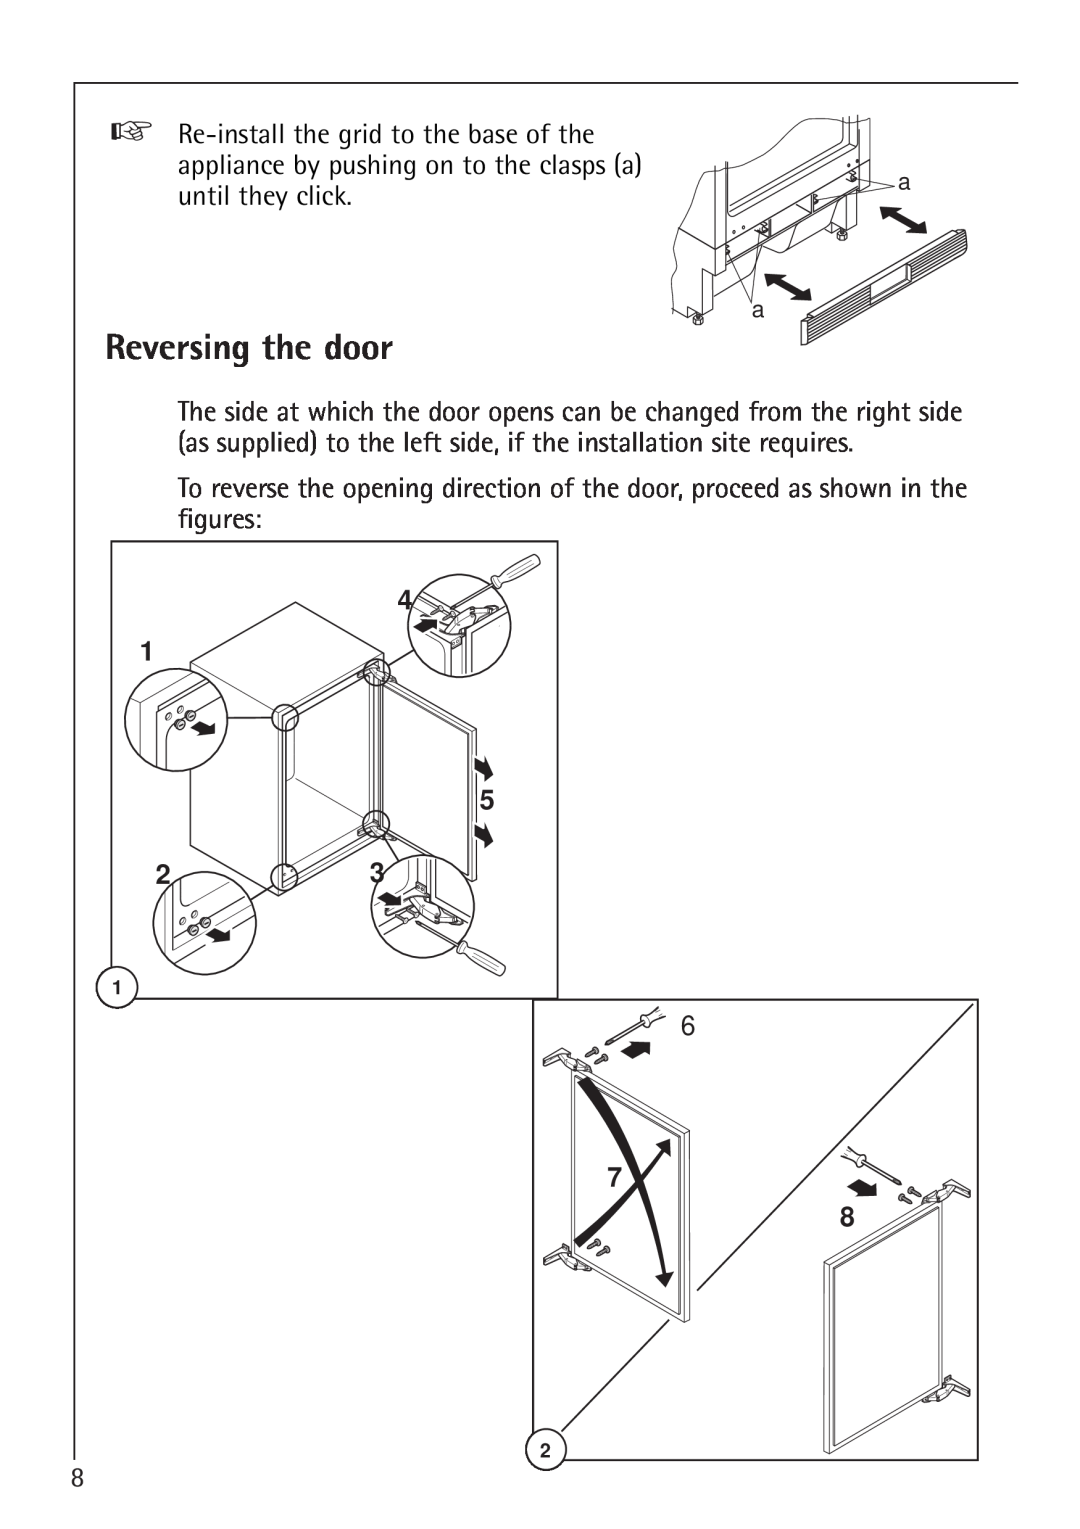 Electrolux 66050i Reversing the door, Re-install the grid to the base of the, appliance by pushing on to the clasps a 